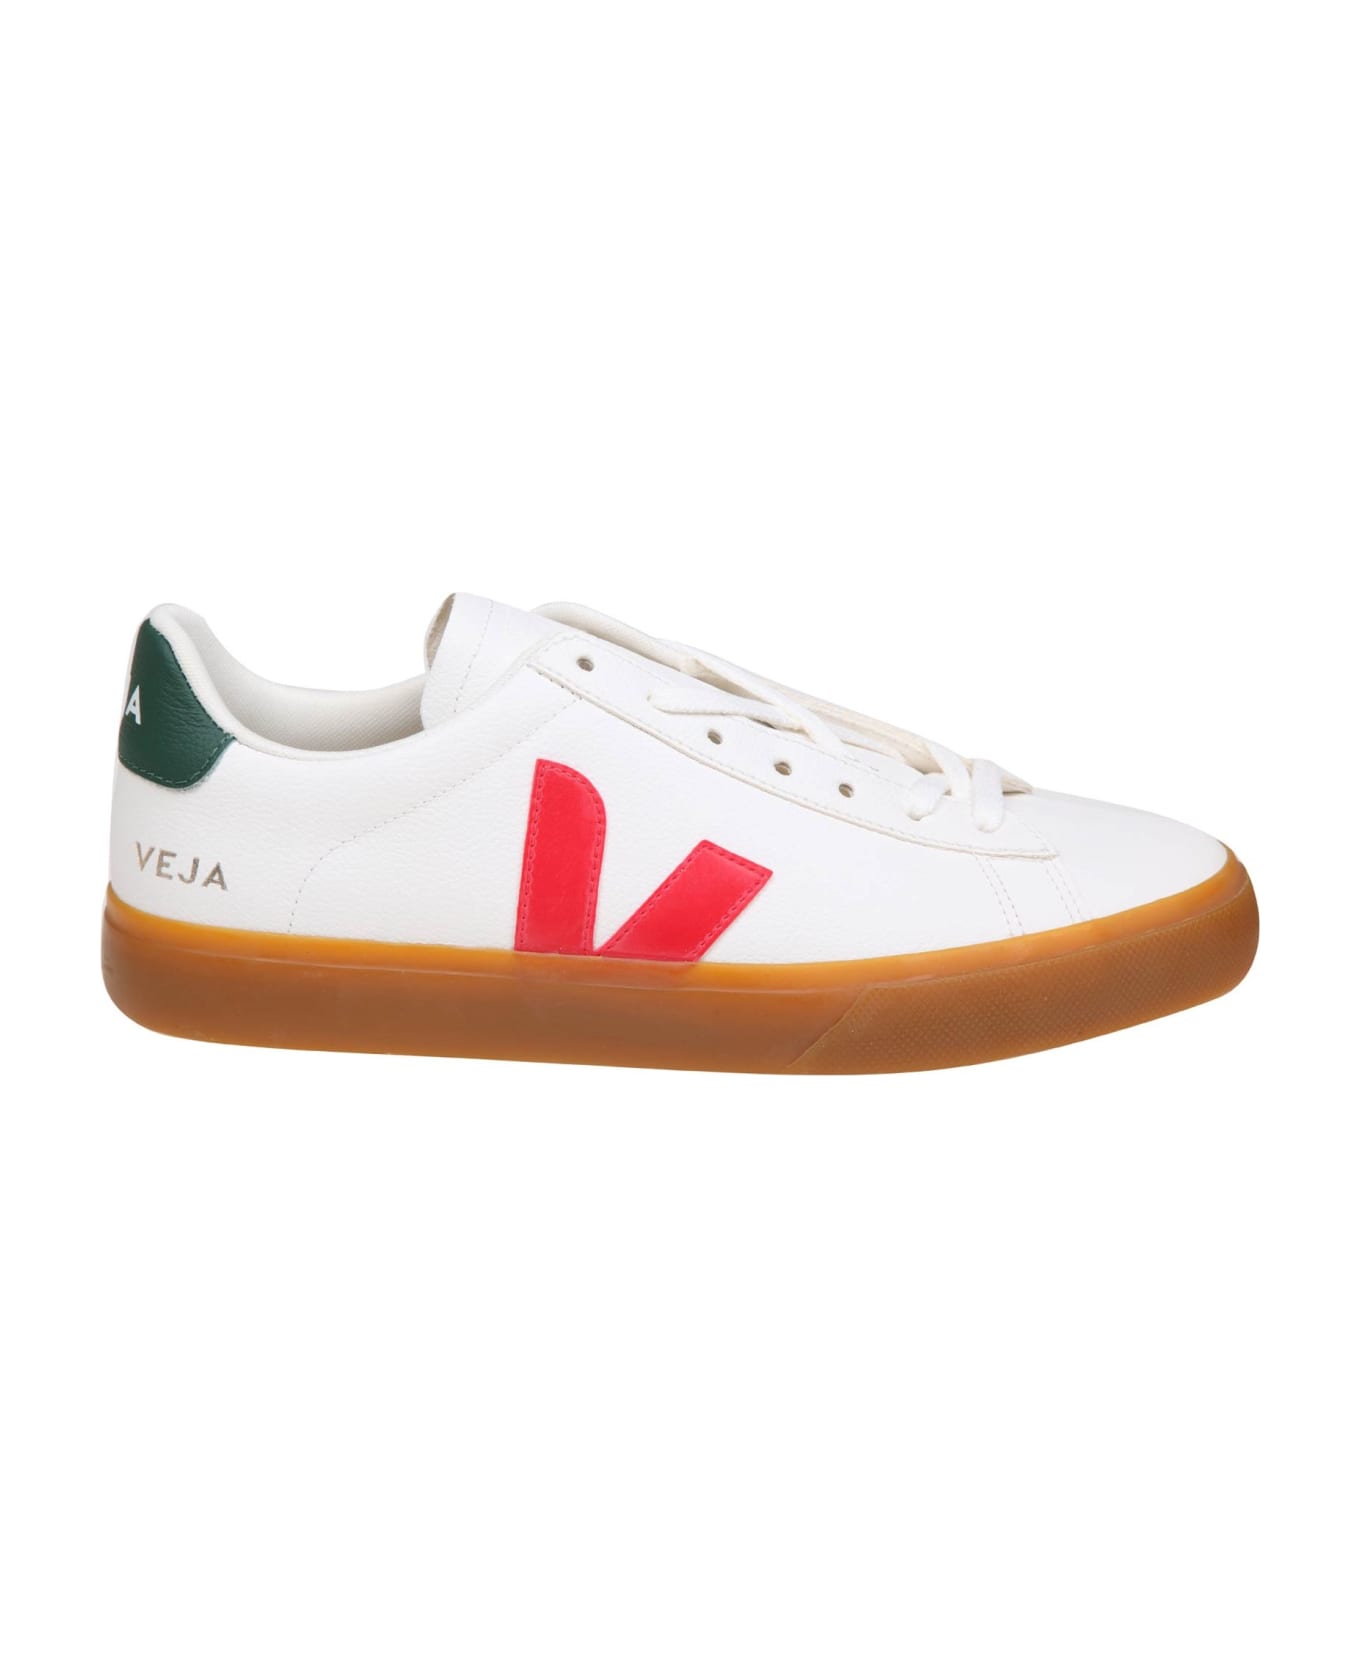 Veja Campo Chromefree In White/red And Green Leather - WHITE/POKER スニーカー